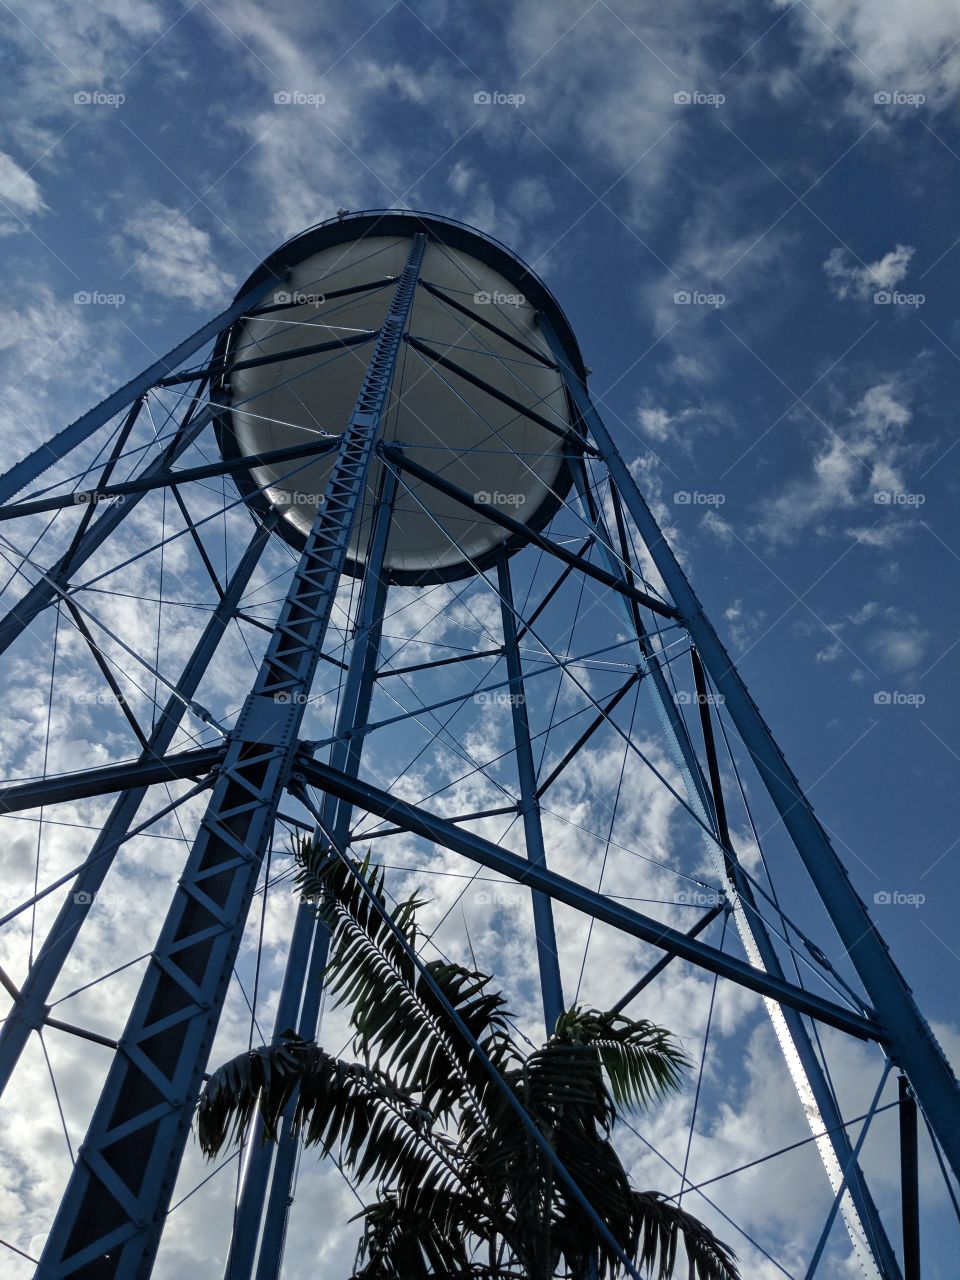 IMAG water tower in Ft Myers, FL